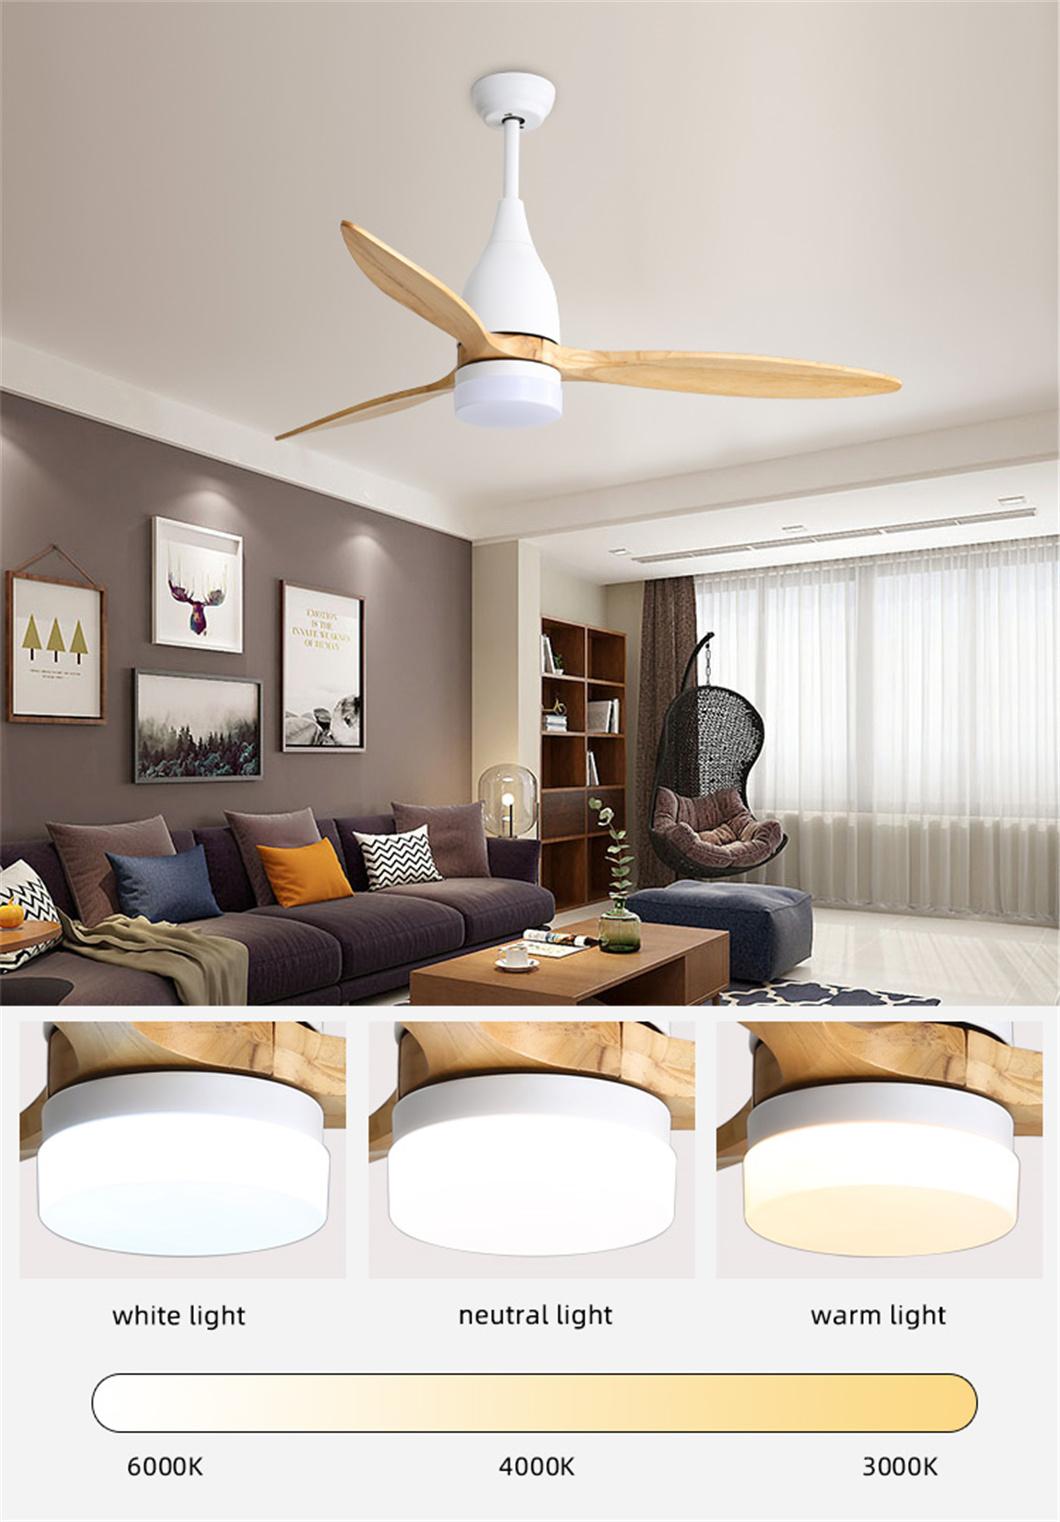 3 Best Wooden Blade 52 Inches Energy Saving 110V Decorative Ceiling Fan